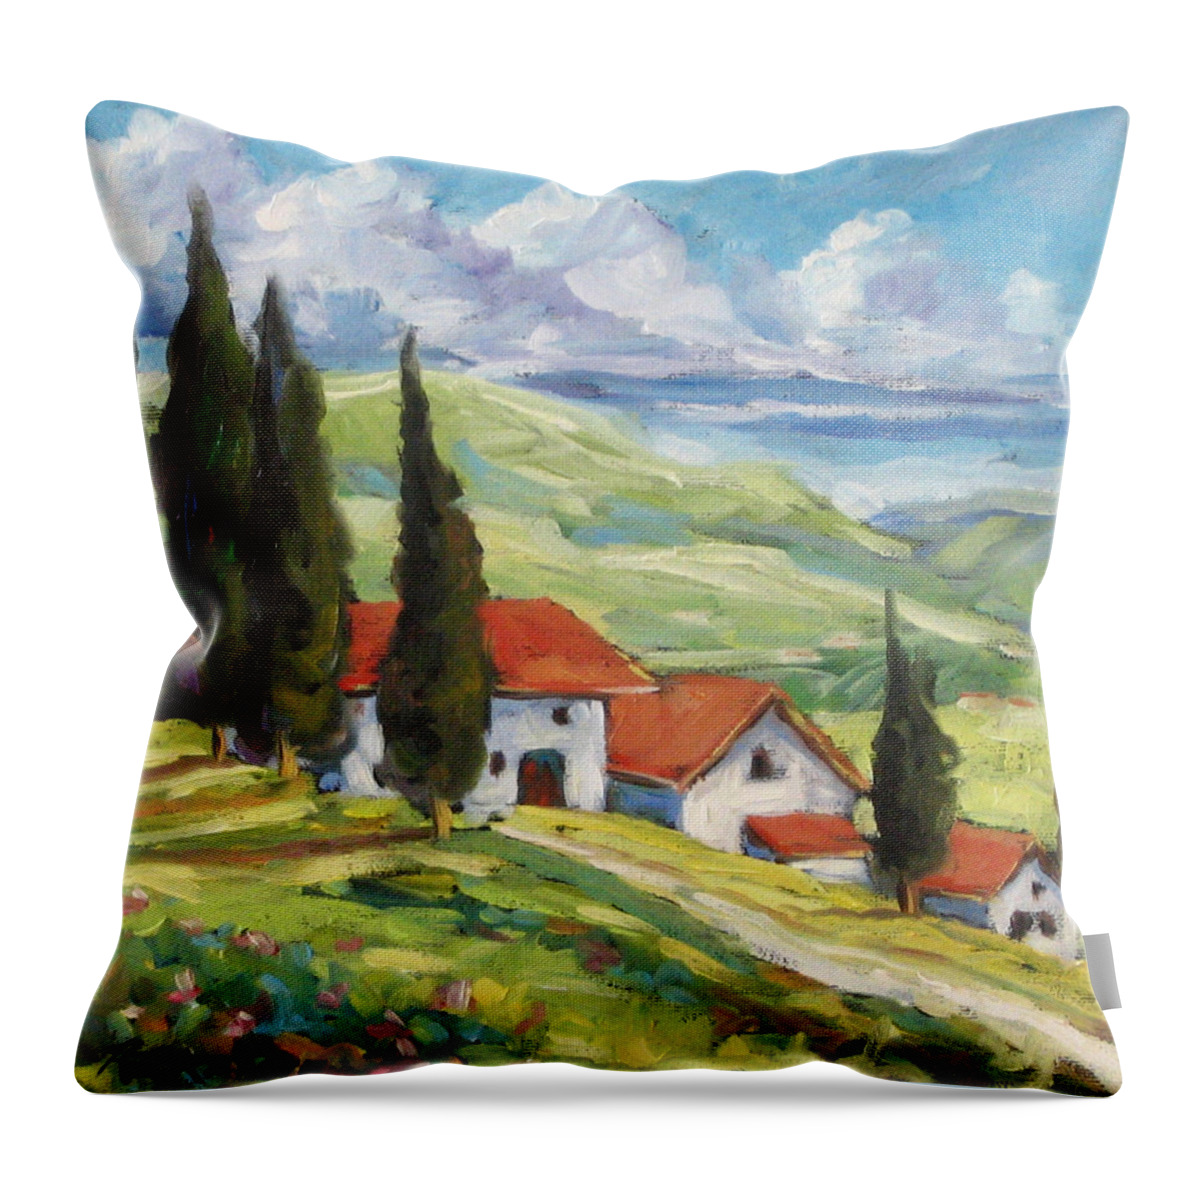 Tuscan Throw Pillow featuring the painting Tuscan Villas by Richard T Pranke